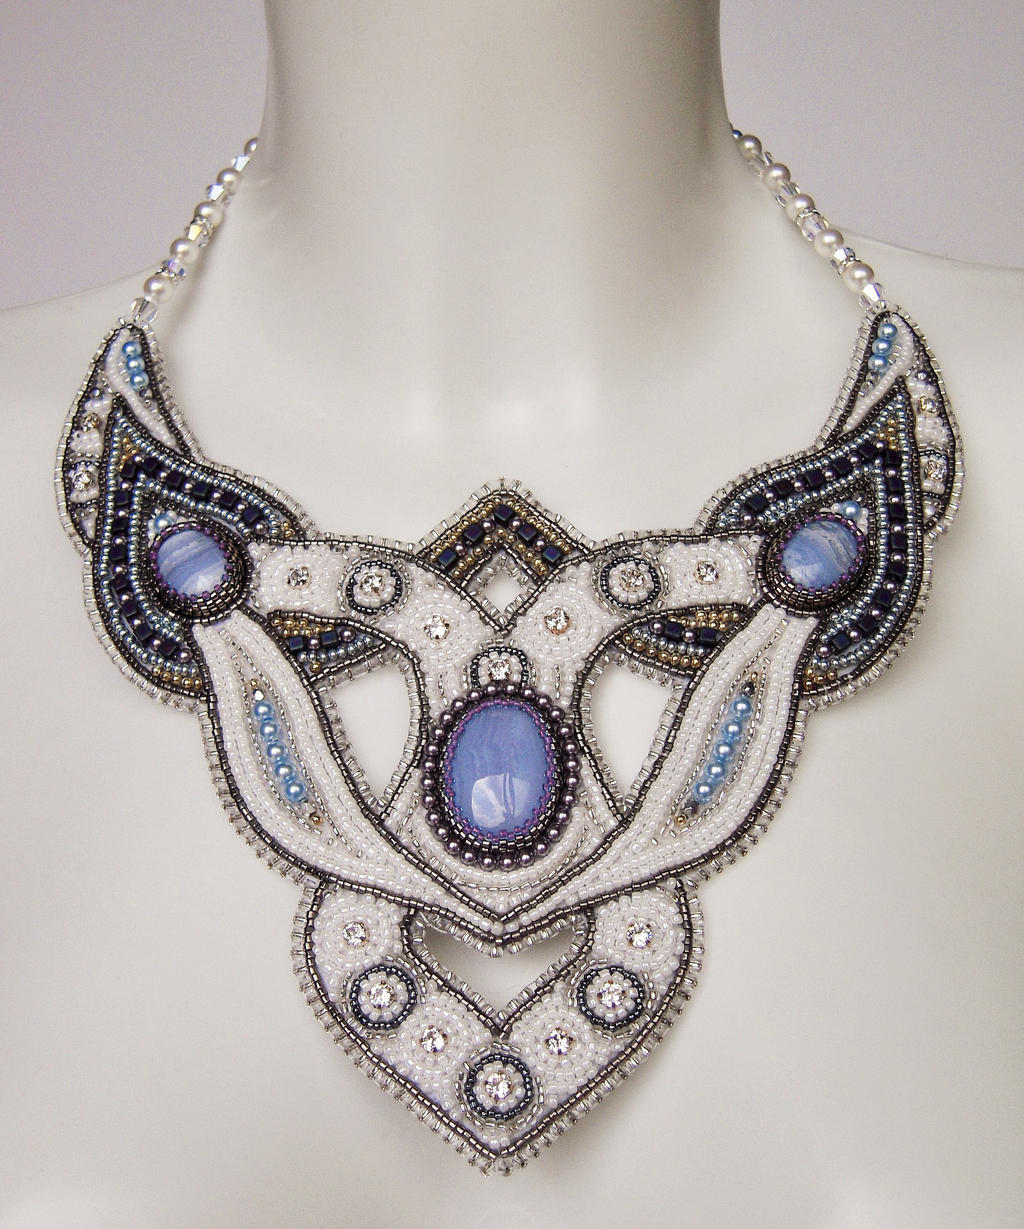 Bead embroidery necklace 3 by Priscillascreations on DeviantArt